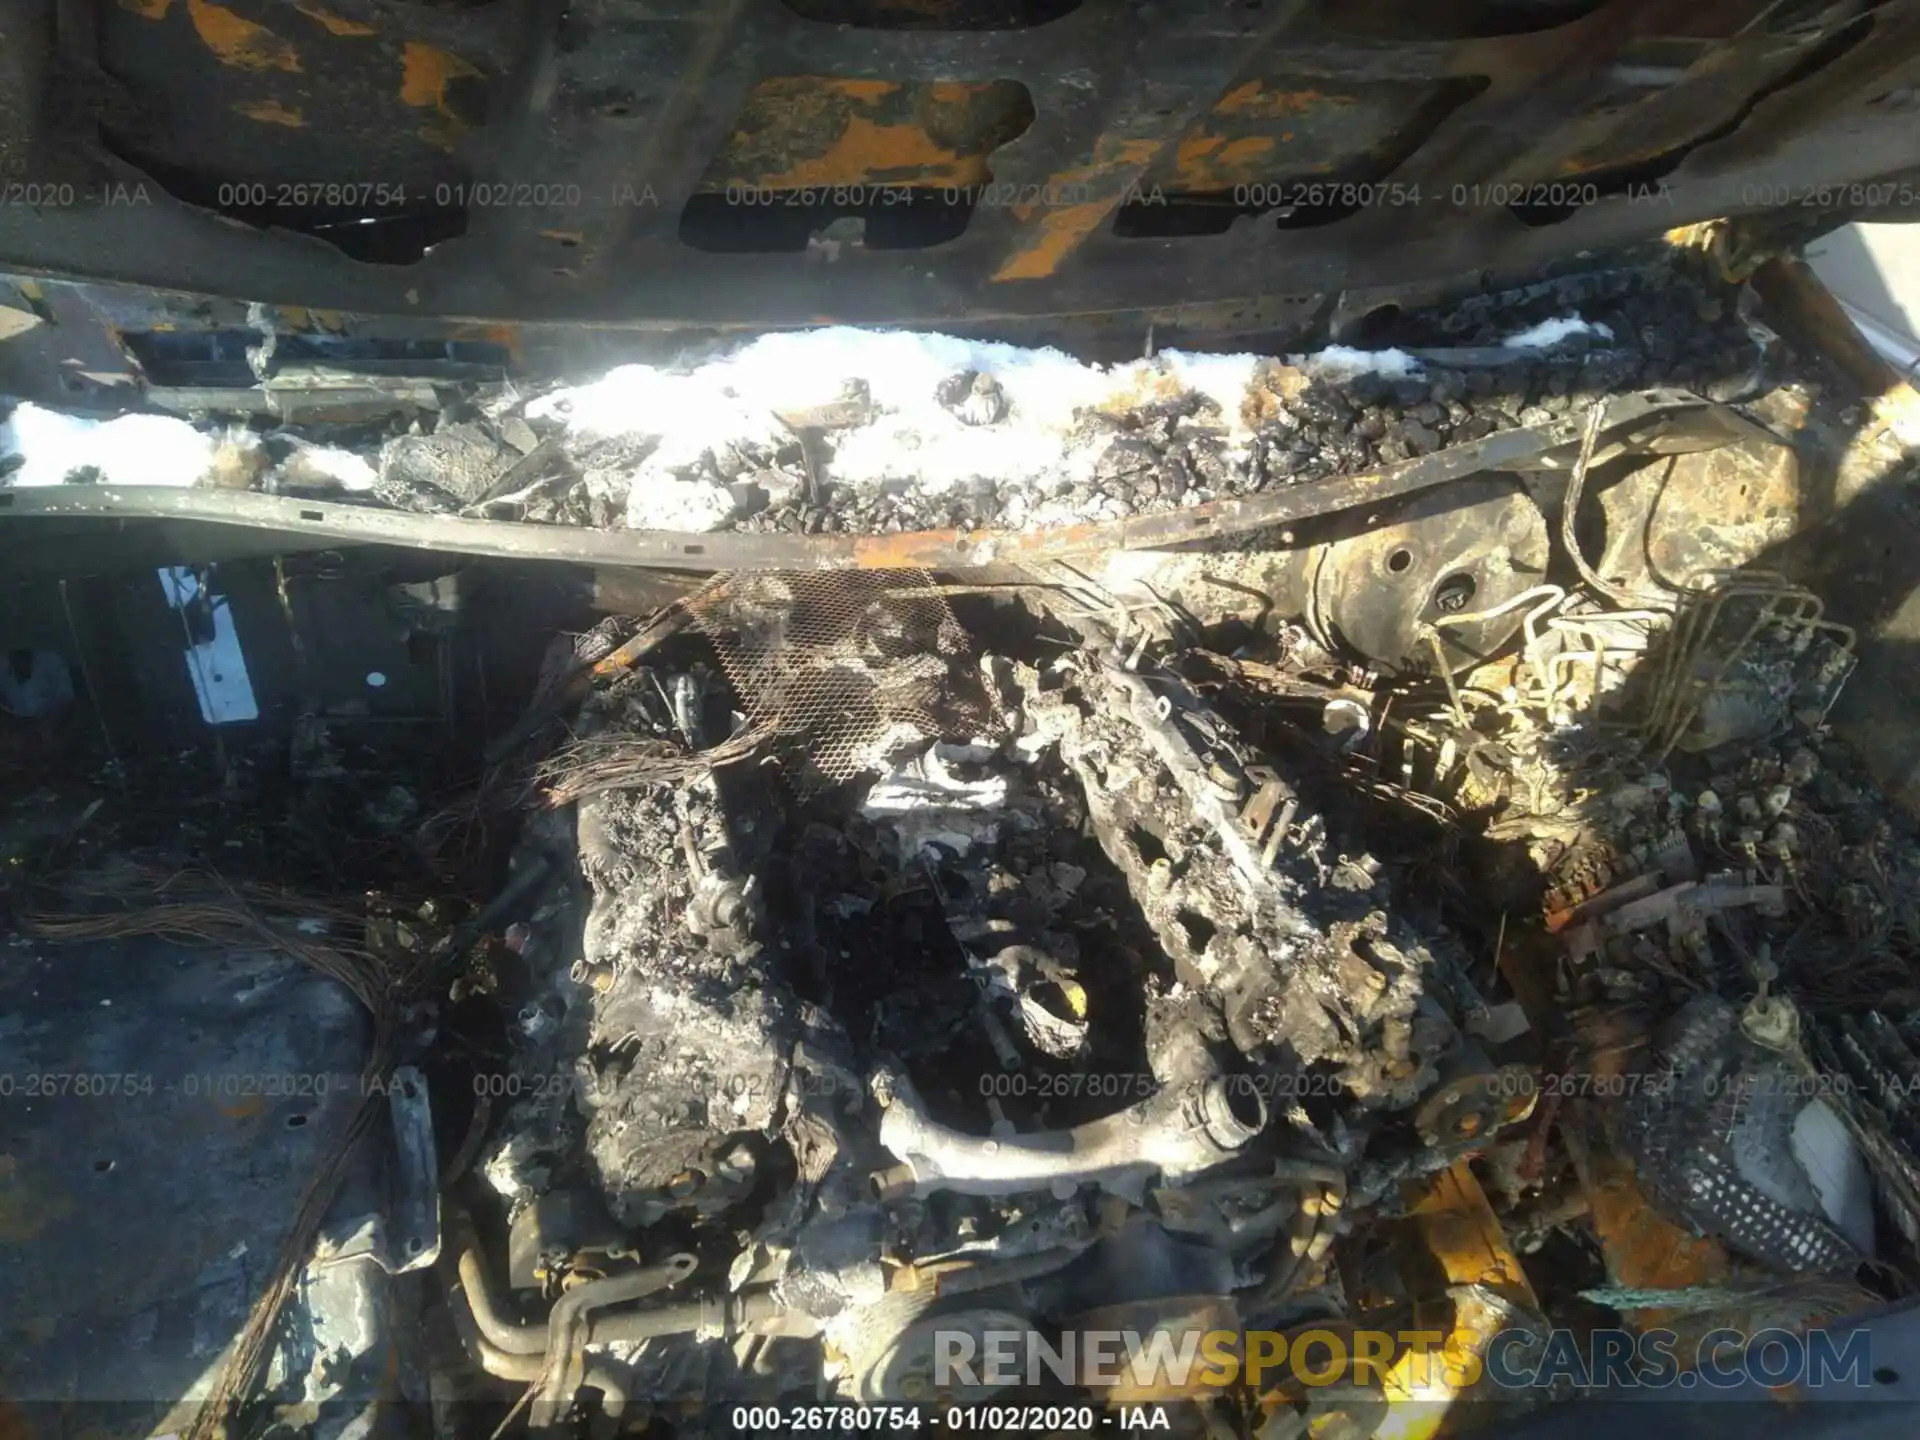 10 Photograph of a damaged car 5TDJY5G10KS168133 TOYOTA SEQUOIA 2019